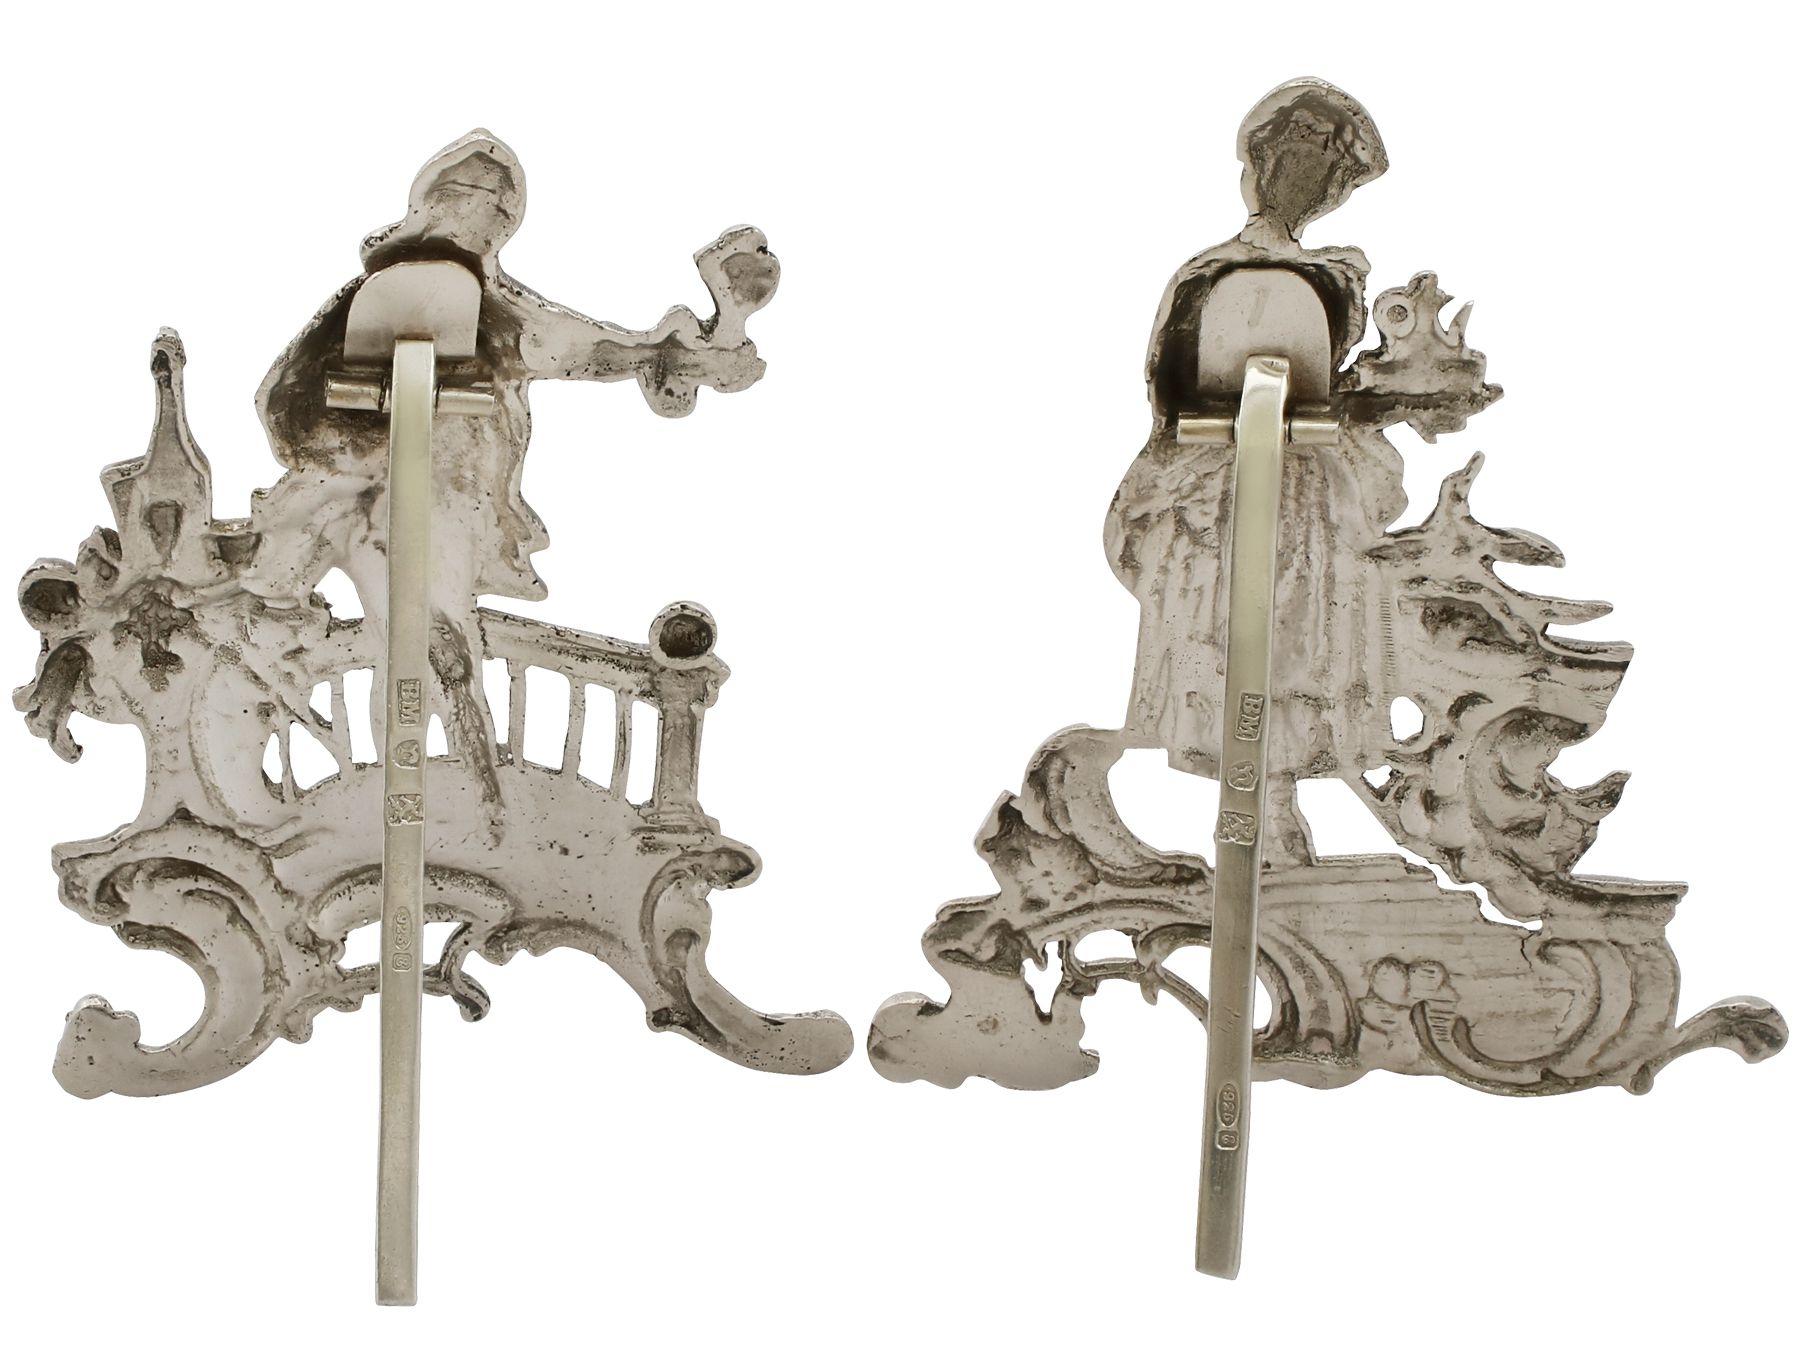 An exceptional, fine and impressive pair of antique German cast sterling silver card/menu holders; an addition to our animal related silverware collection.

These exceptional German cast sterling silver menu holders have been realistically